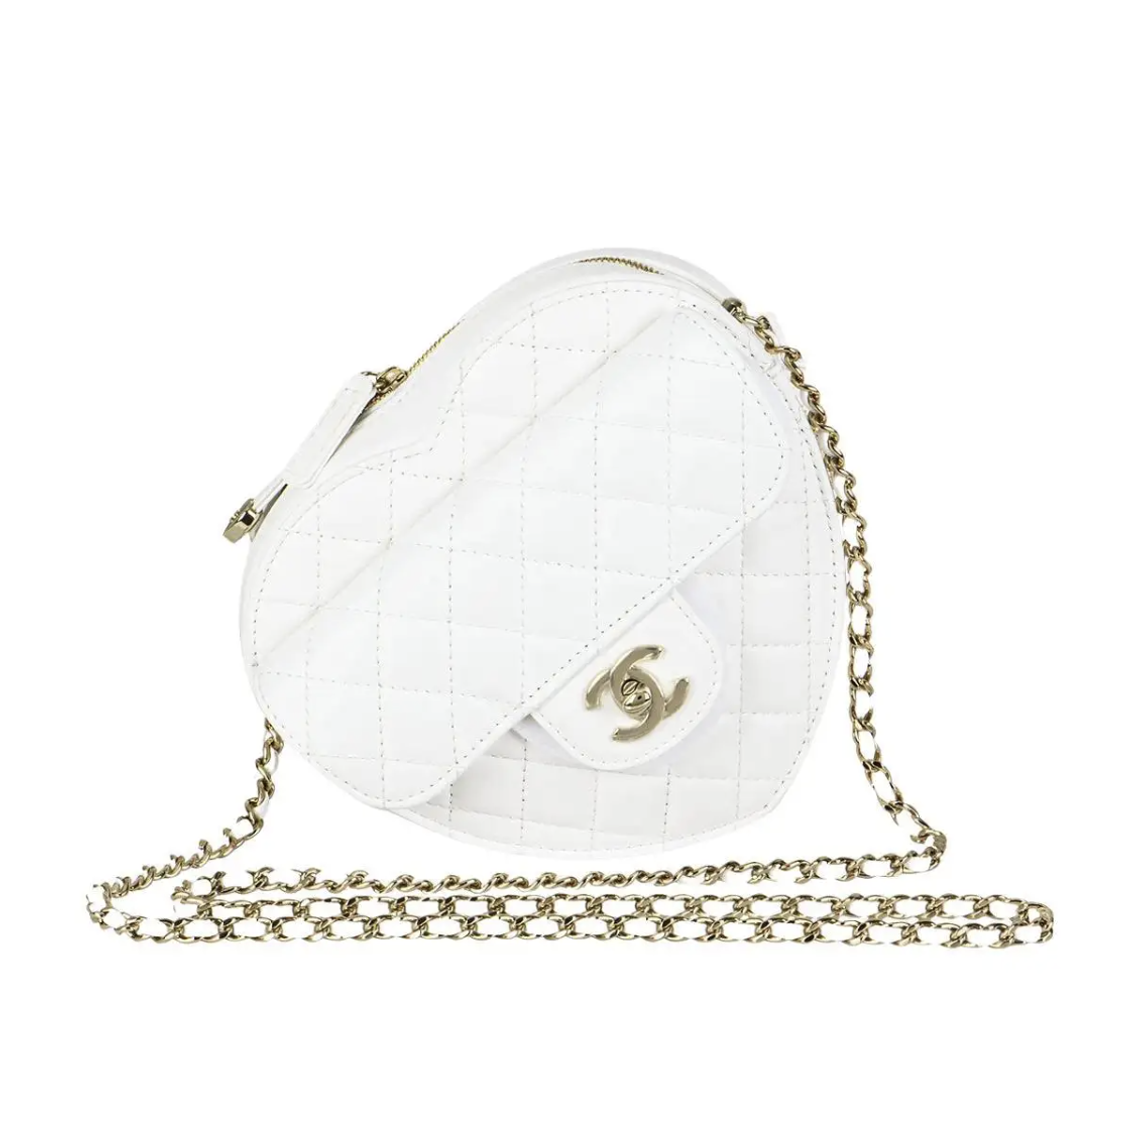 Chanel Large Heart Bag in Black Leather with Gold Hardware — AMAIA